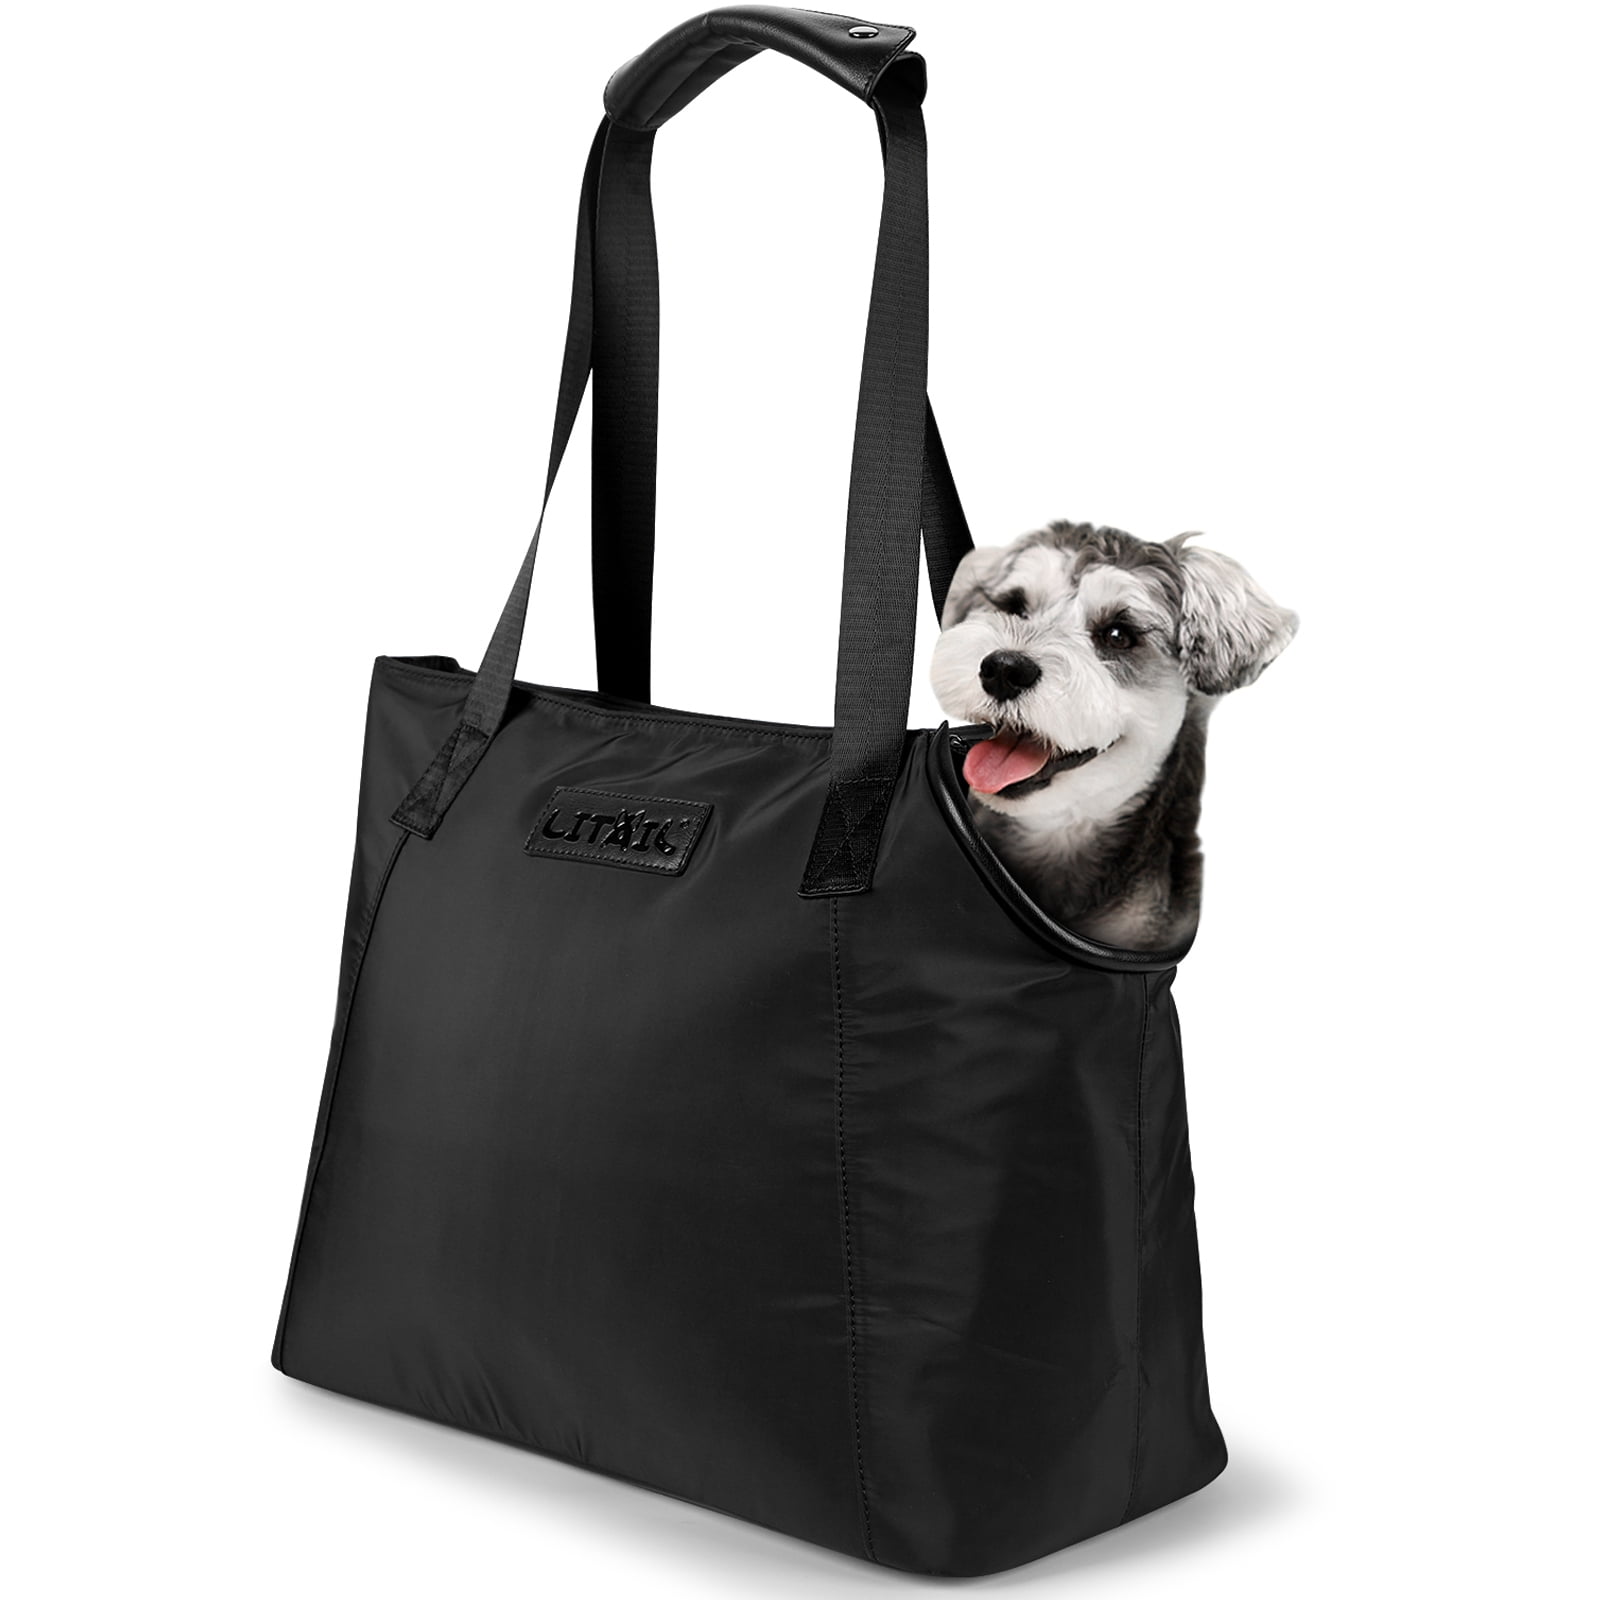 LeerKing Dog Carriers for Small Dogs Lightweight Pet Tote Bag with Polar  Fleece Sturdy Puppy/Cat/Bunny Purse Bag with PVC Base Plate for Walking